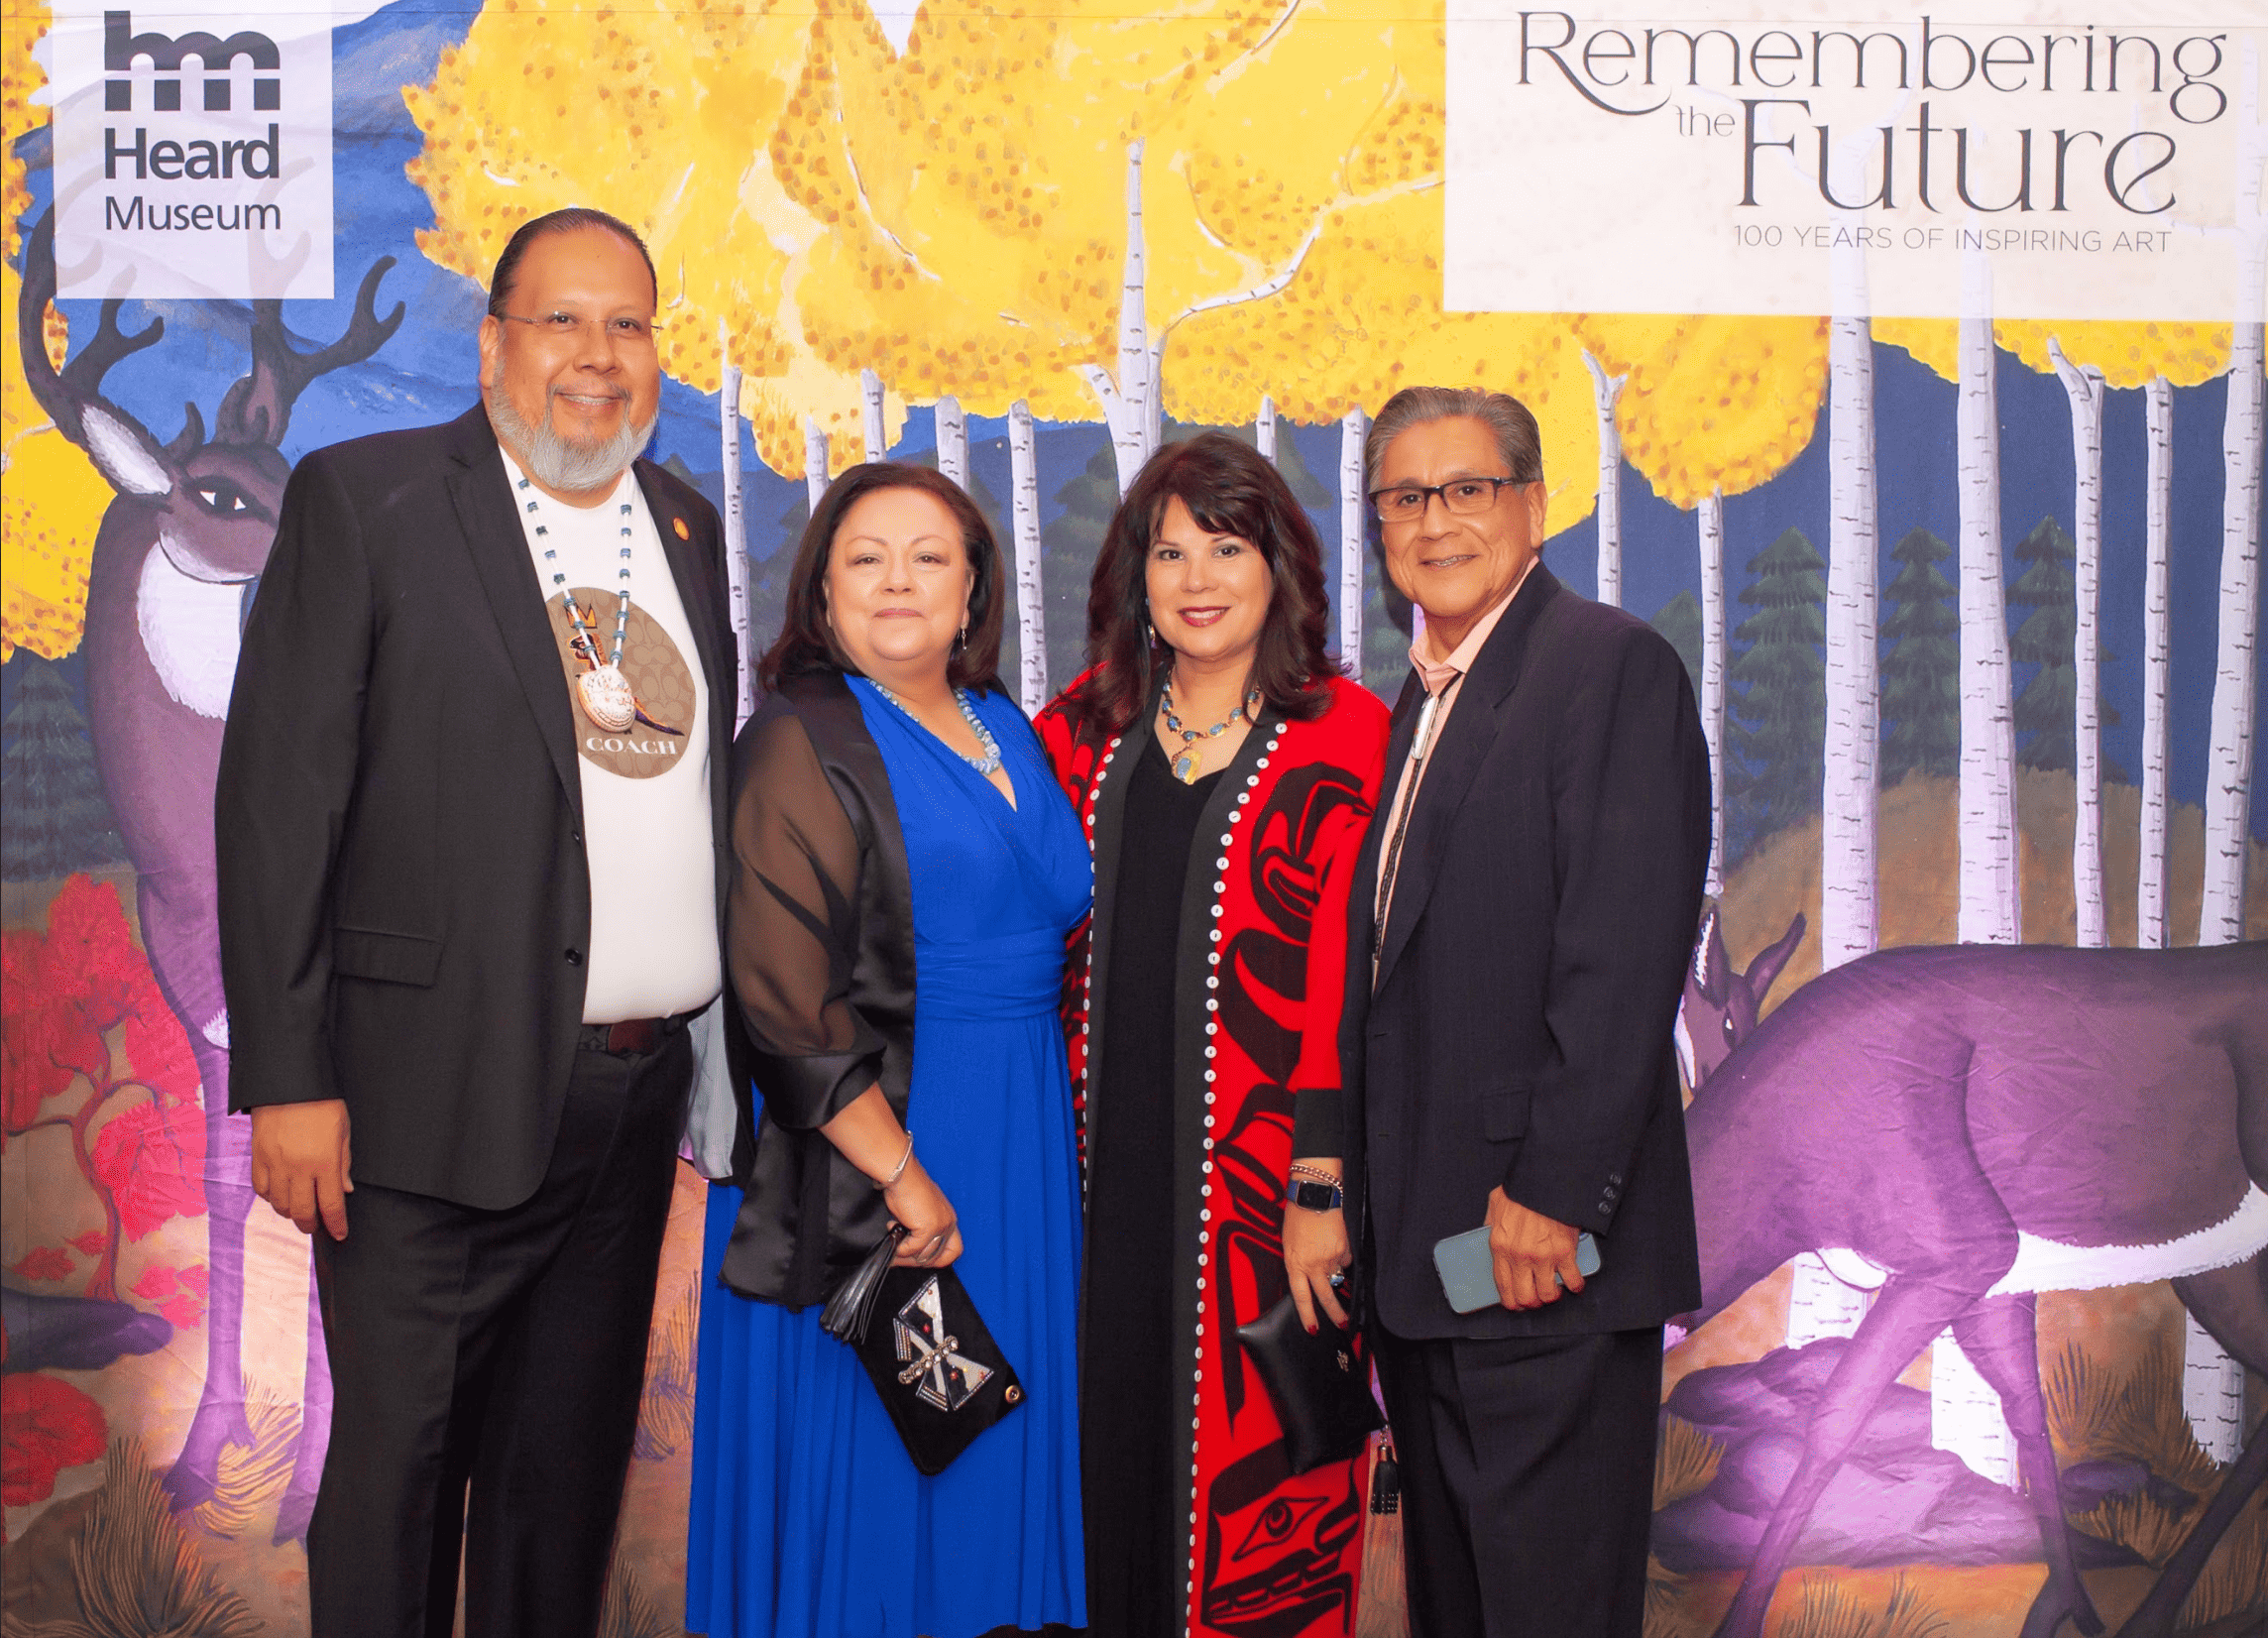 Four people dressed in formal attire posing together at the moondance event called "remembering the future: 100 years of inspiring art" at the Heard Museum.